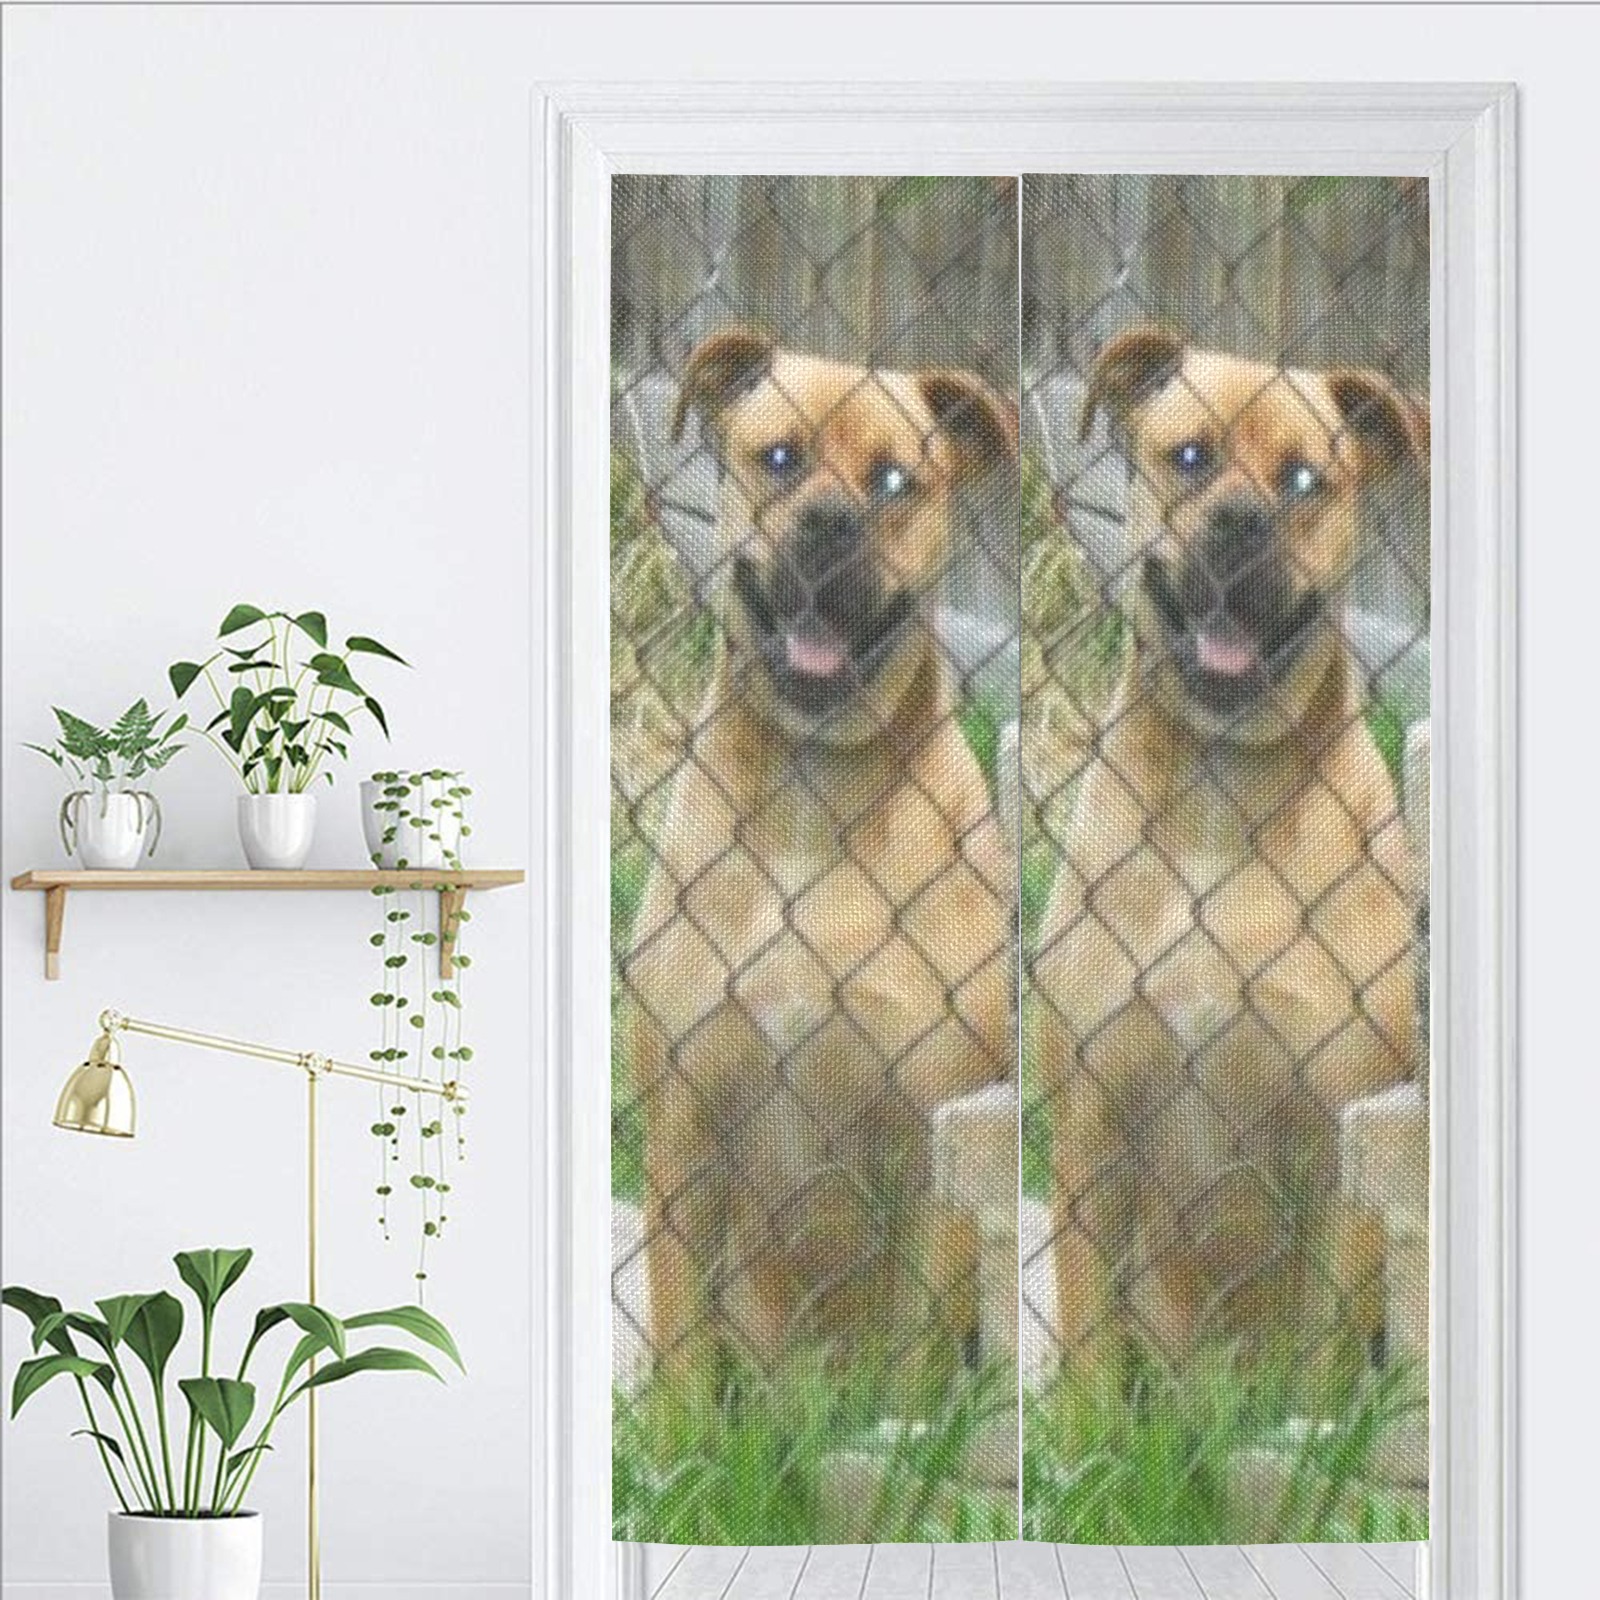 A Smiling Dog Door Curtain Tapestry